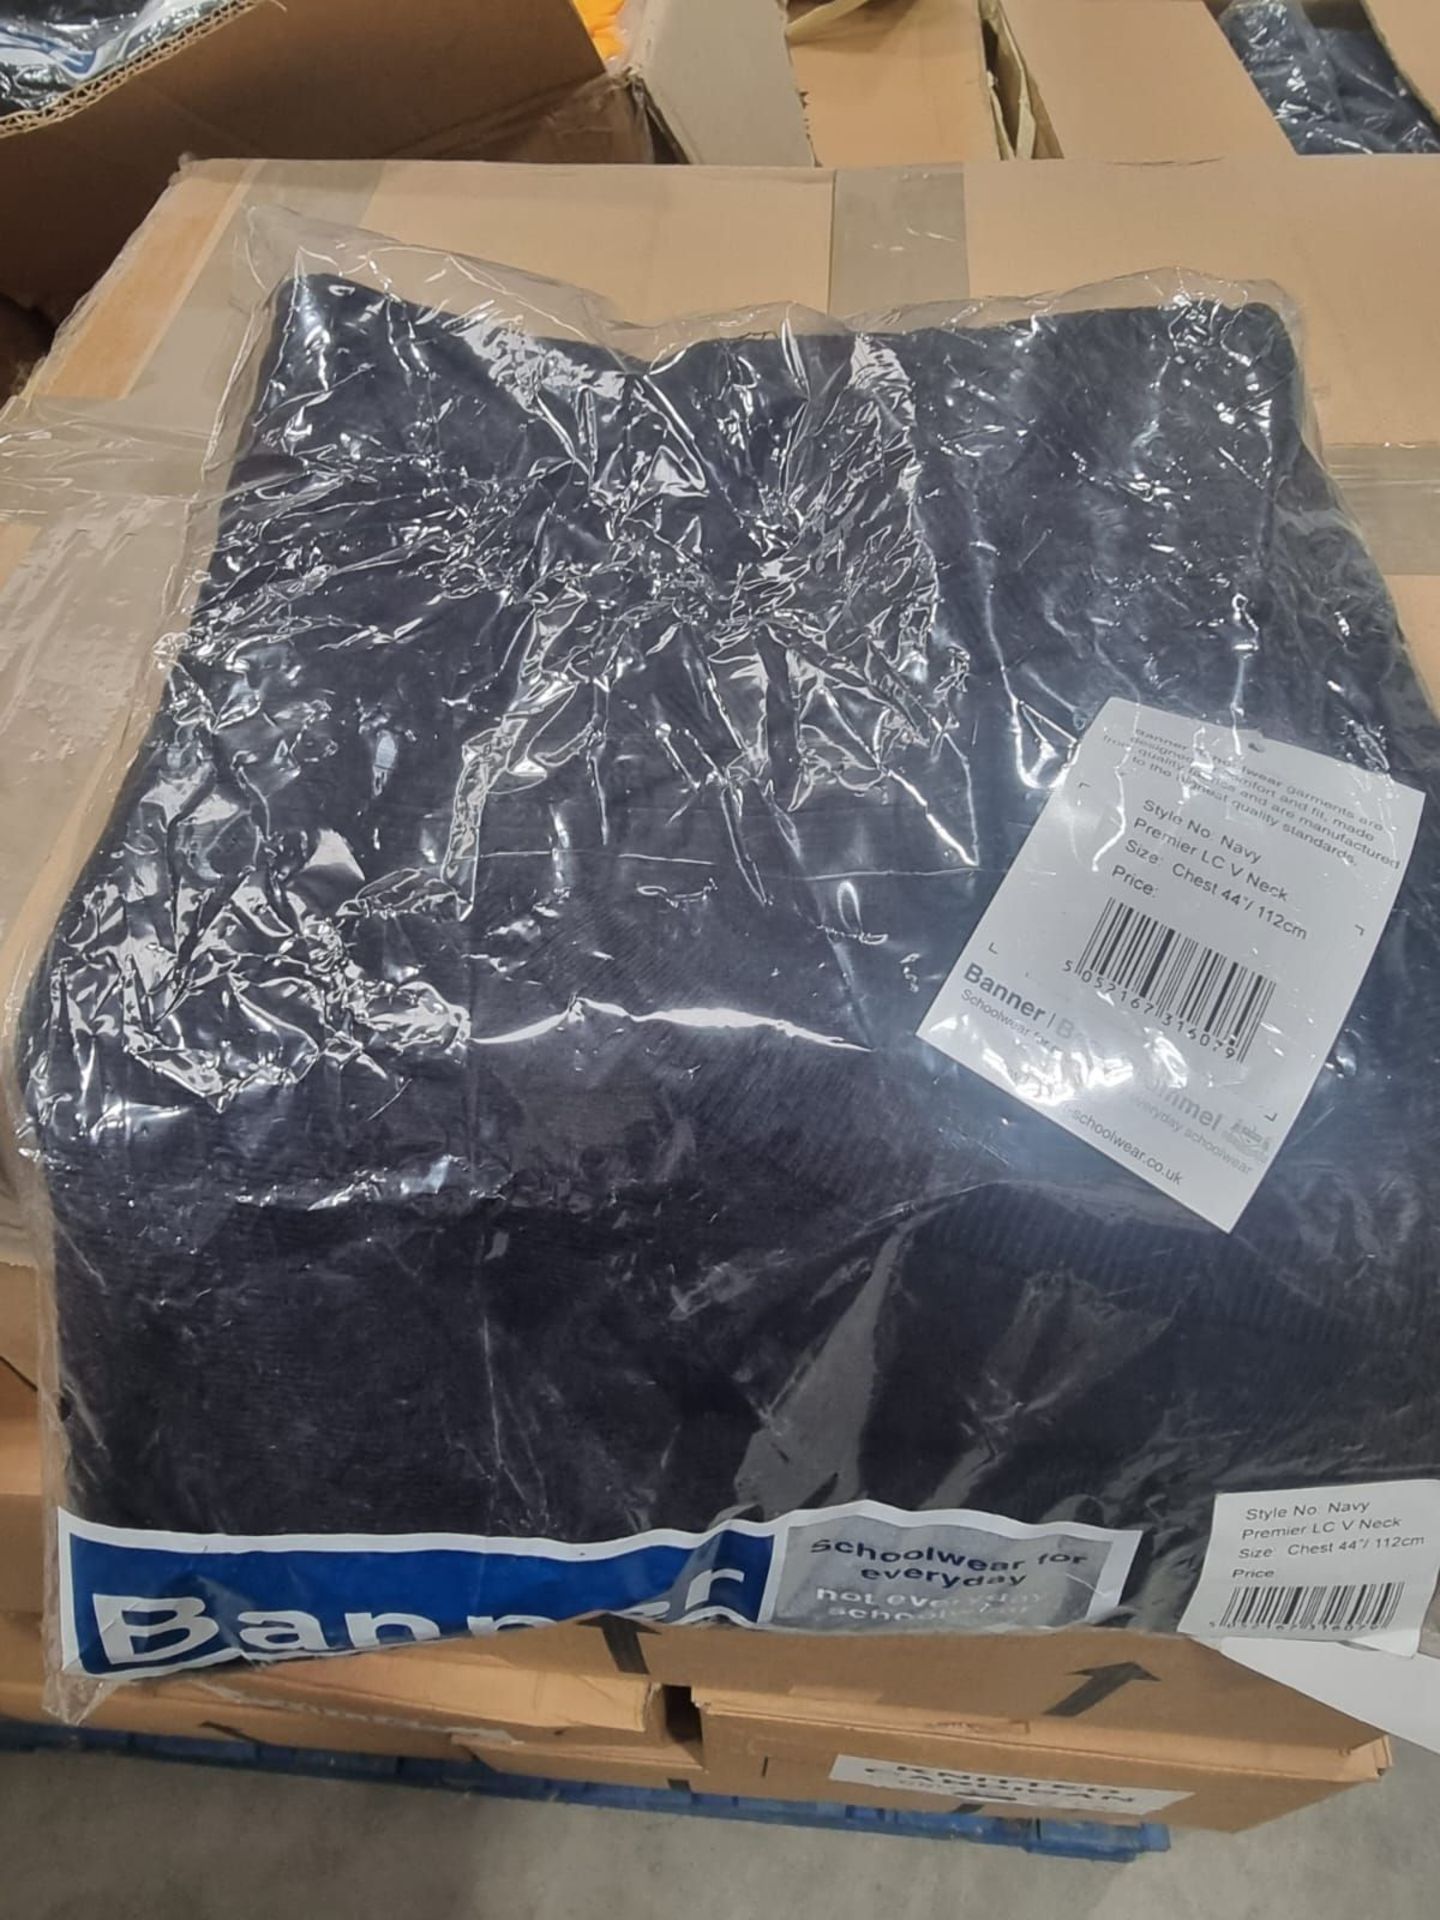 PALLET TO CONTAIN A LARGE QUANTITY OF NEW CLOTHING GOODS. MAY INCLUDE ITEMS SUCH AS: T-SHIRTS, - Image 23 of 28